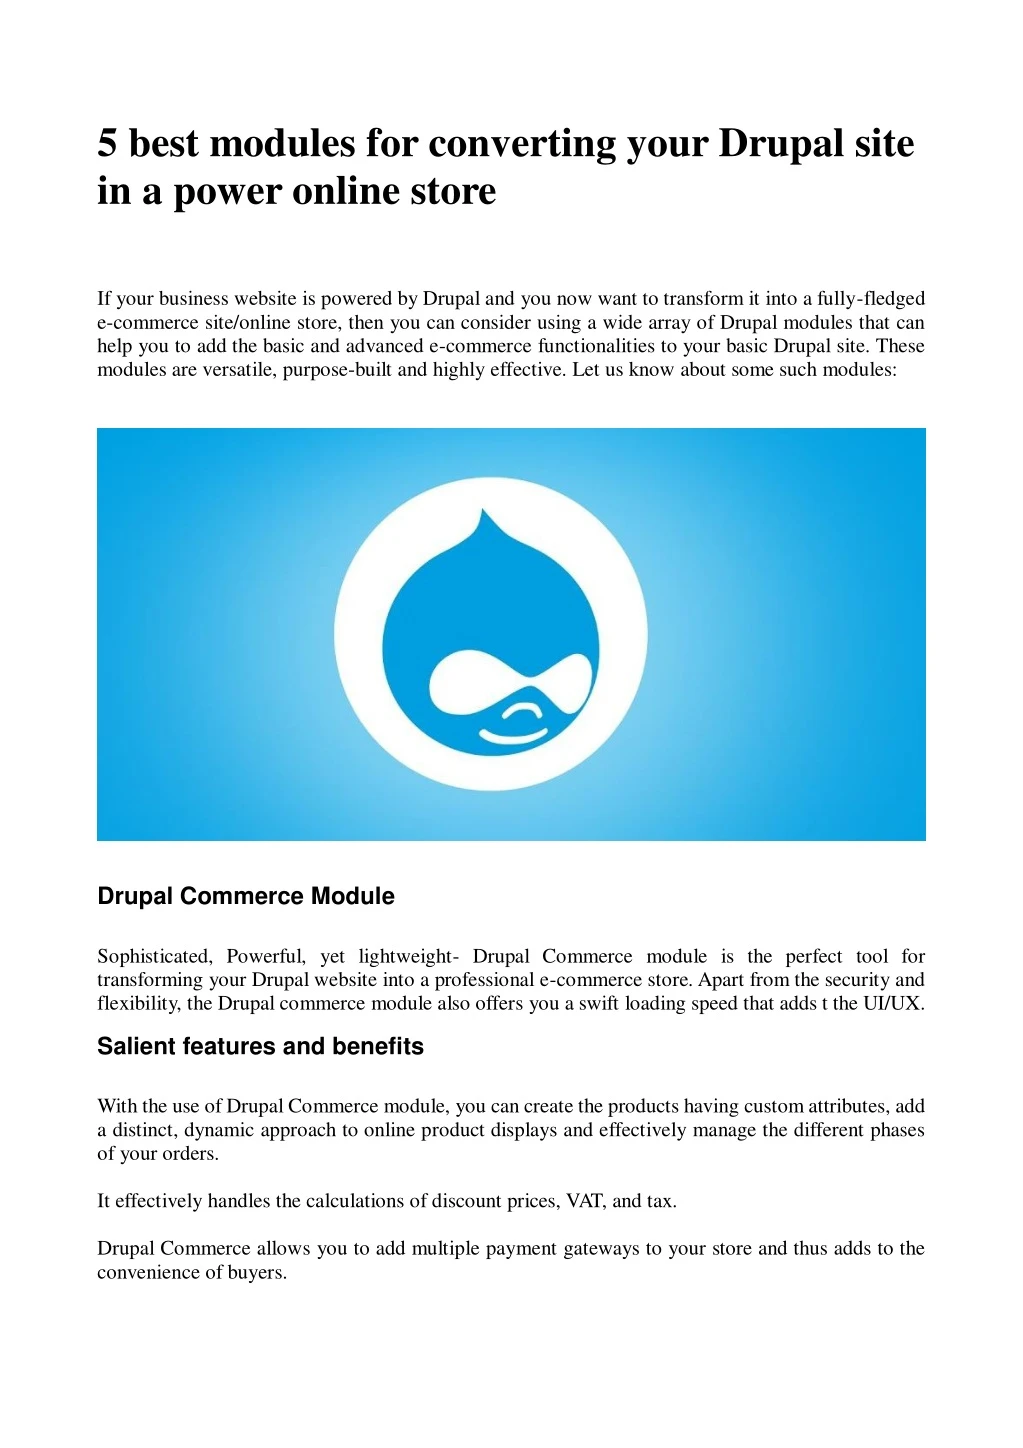 5 best modules for converting your drupal site